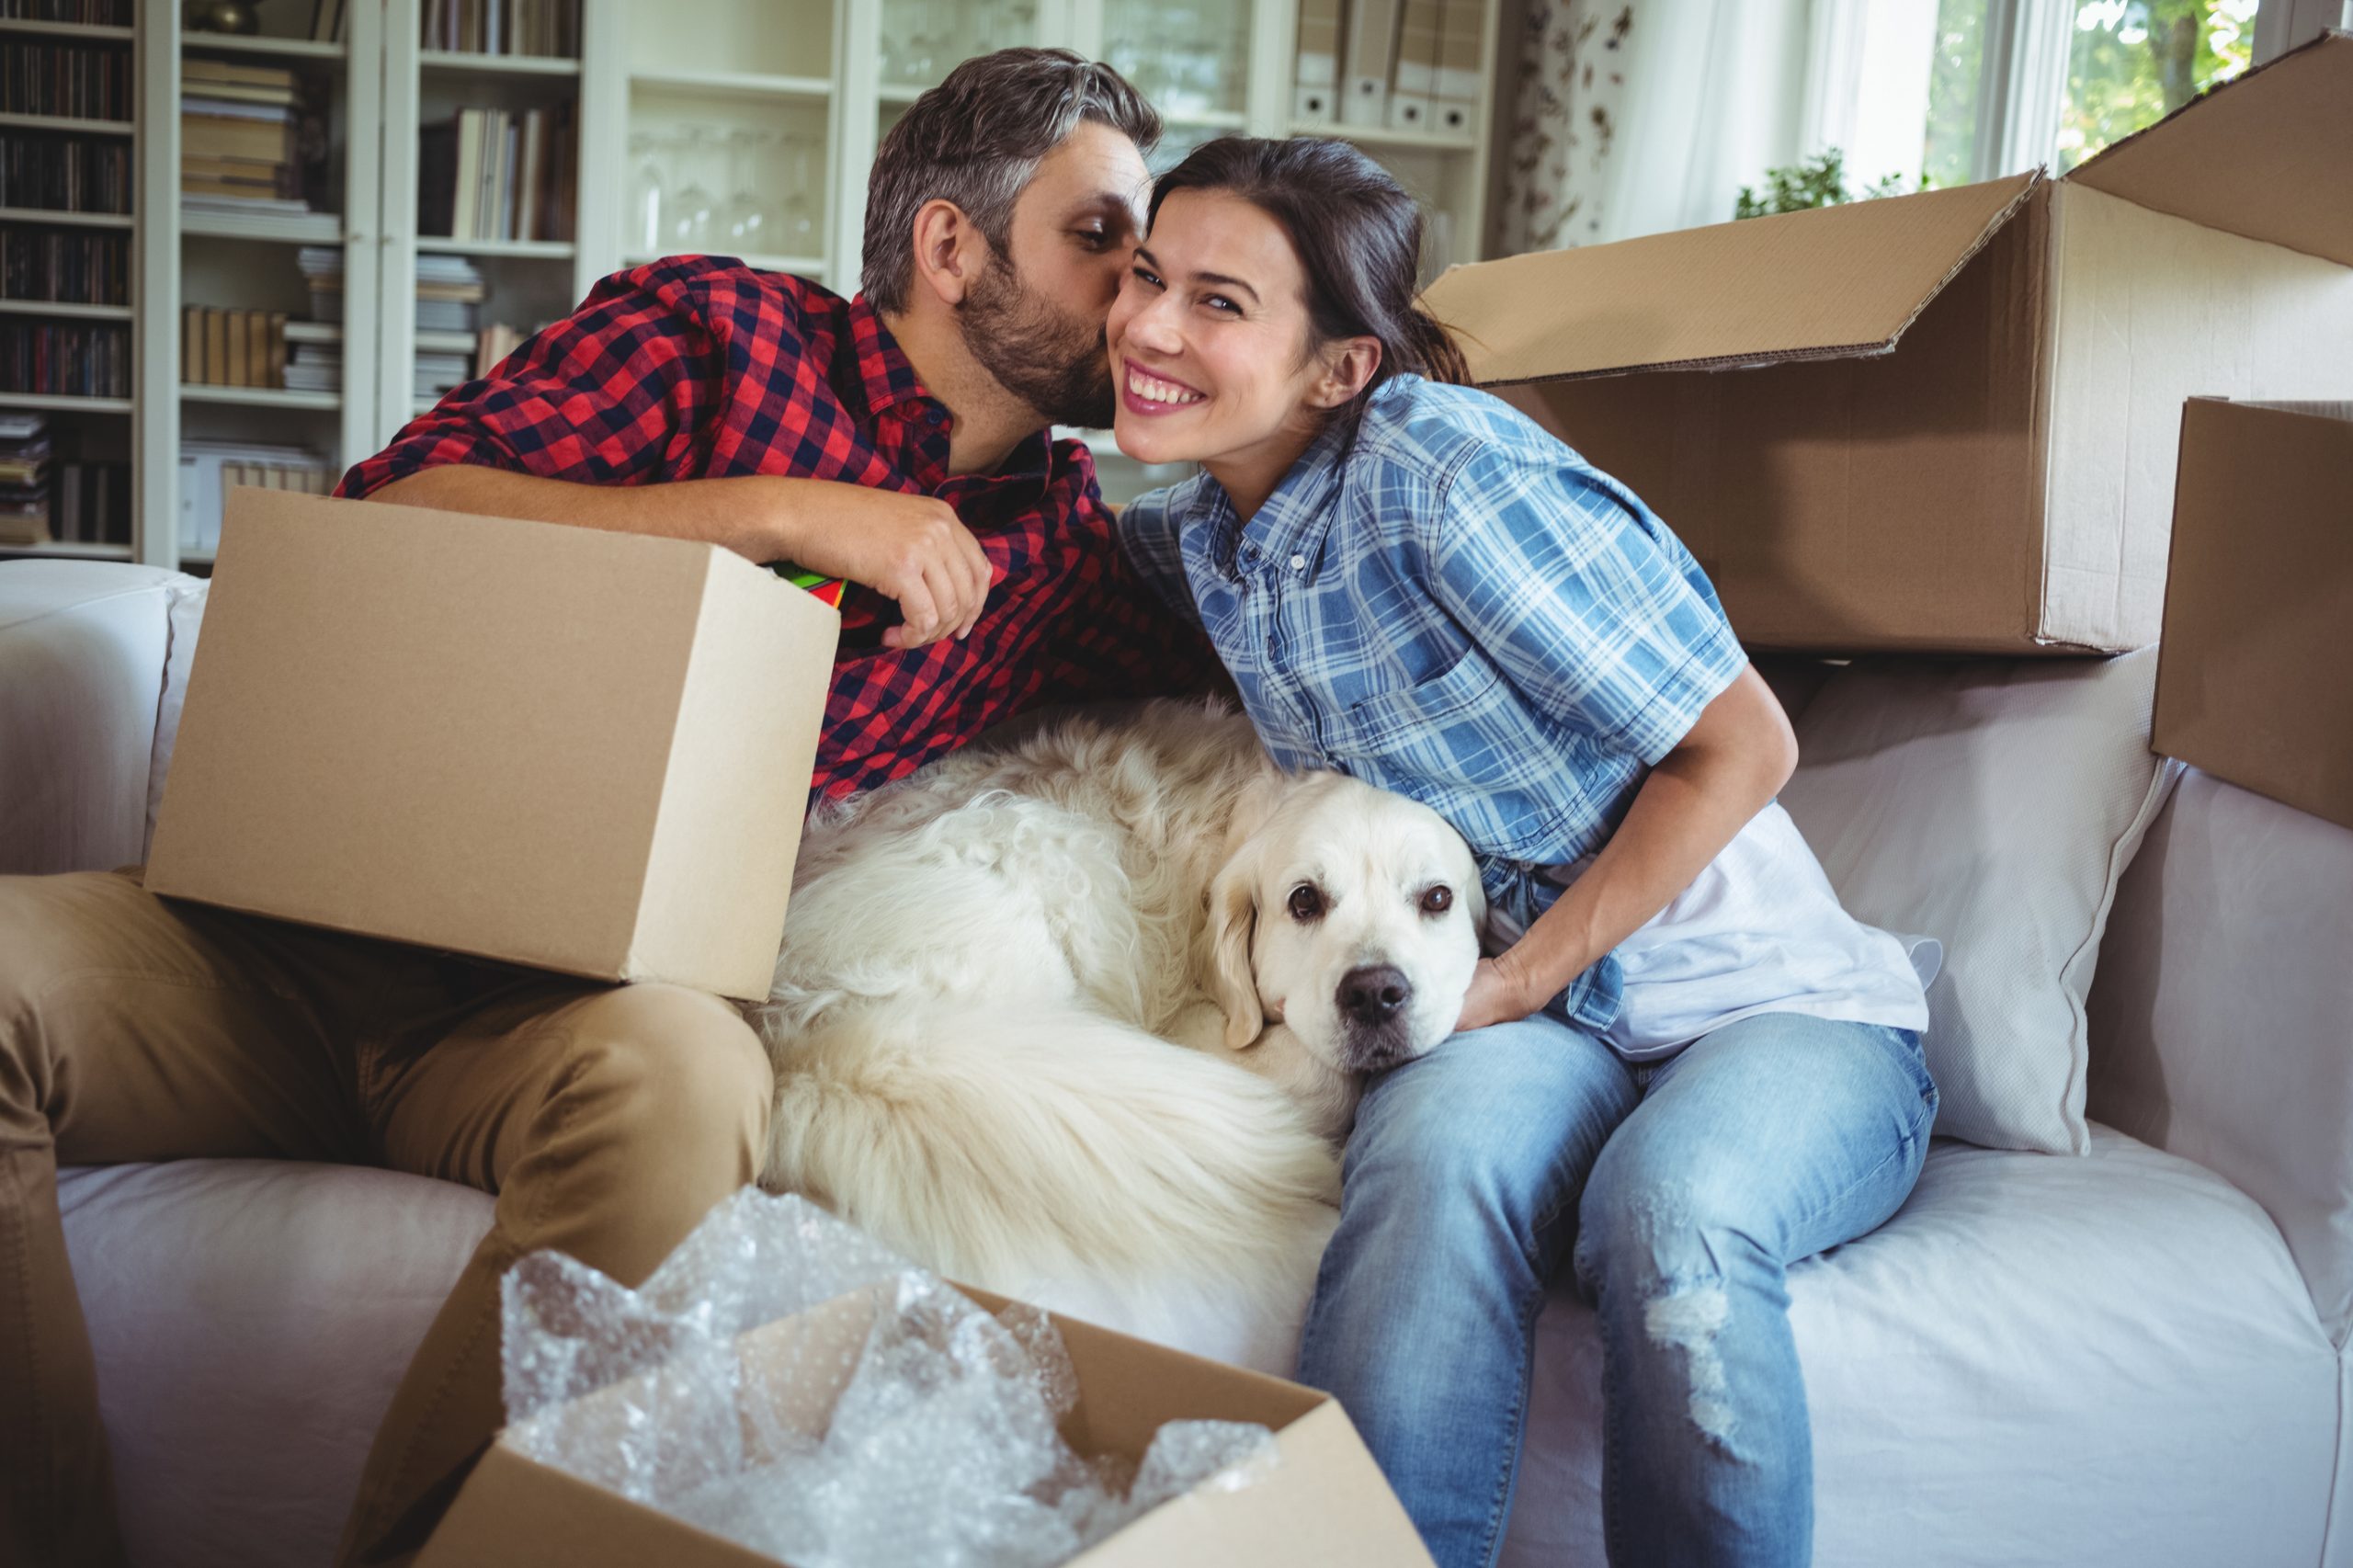 Happy couple unpacking boxes and kissing with dog between them